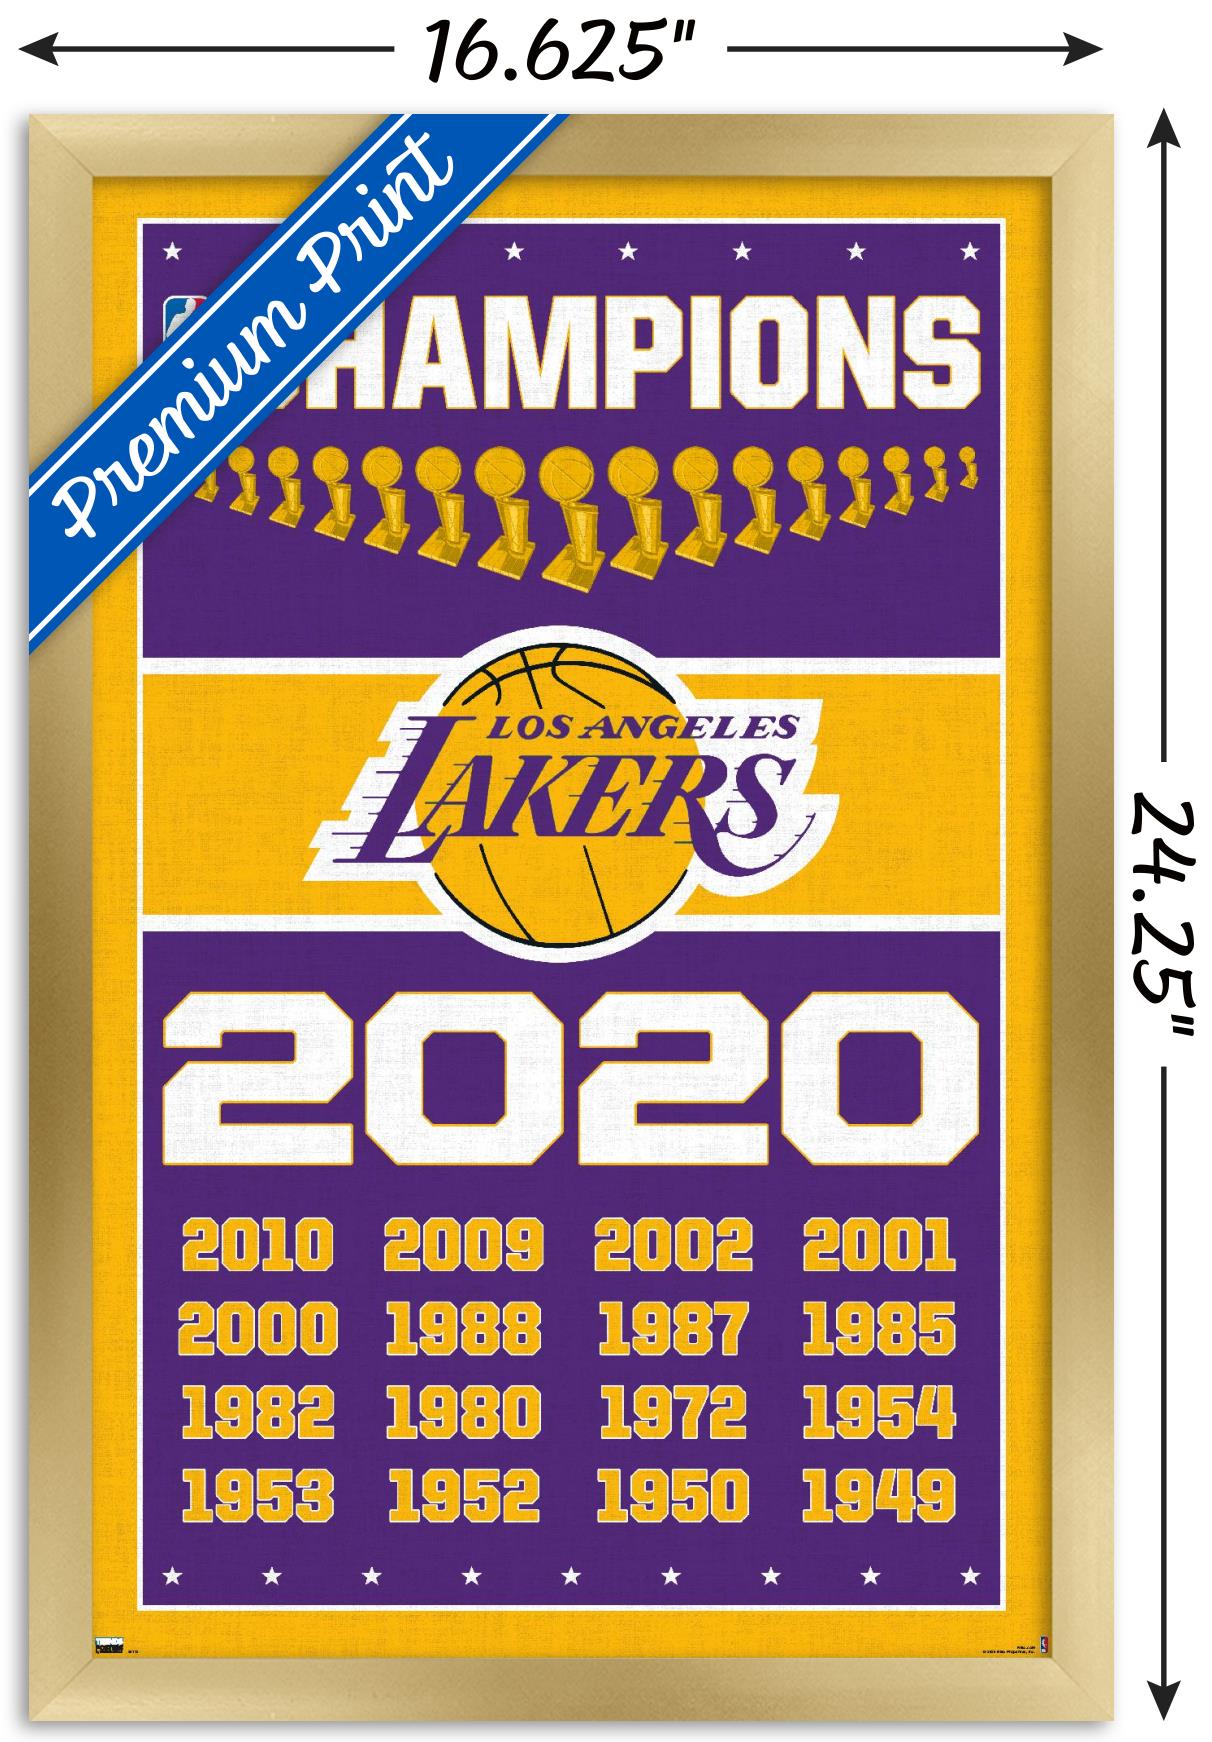 NBA Los Angeles Lakers - Champions 20 Wall Poster, 14.725" x 22.375", Framed - image 2 of 5